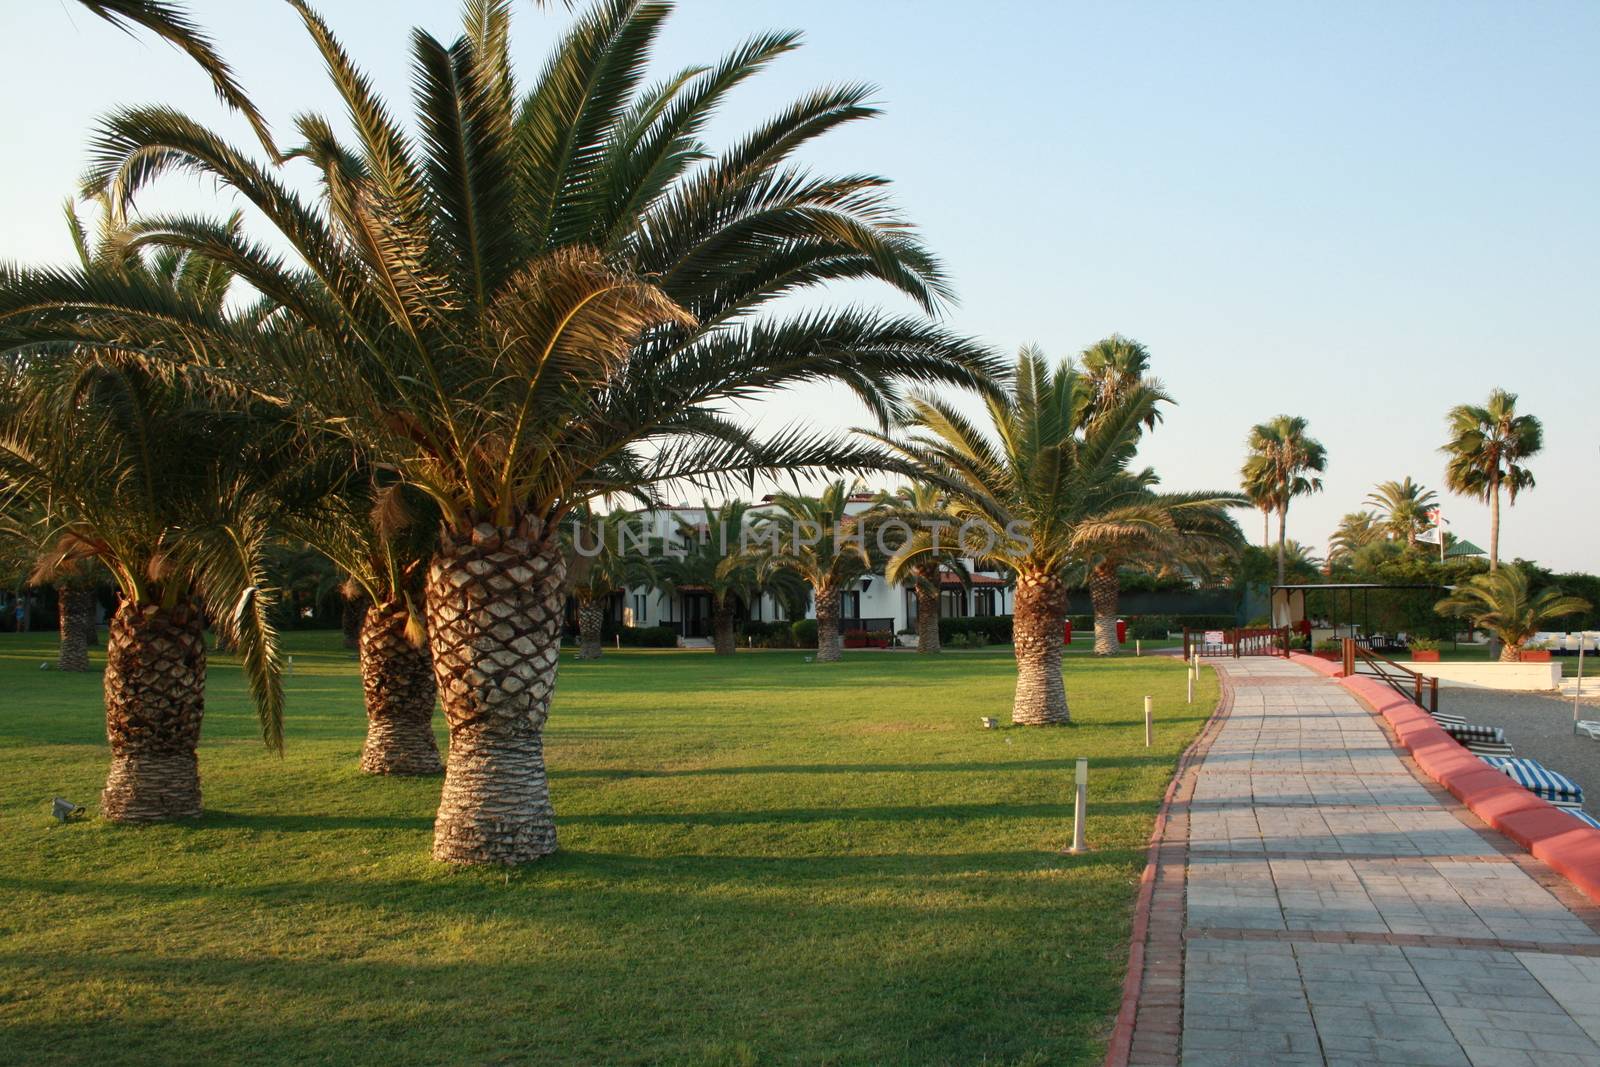 Palm trees and a walking path in a tropical garden on the sea coast